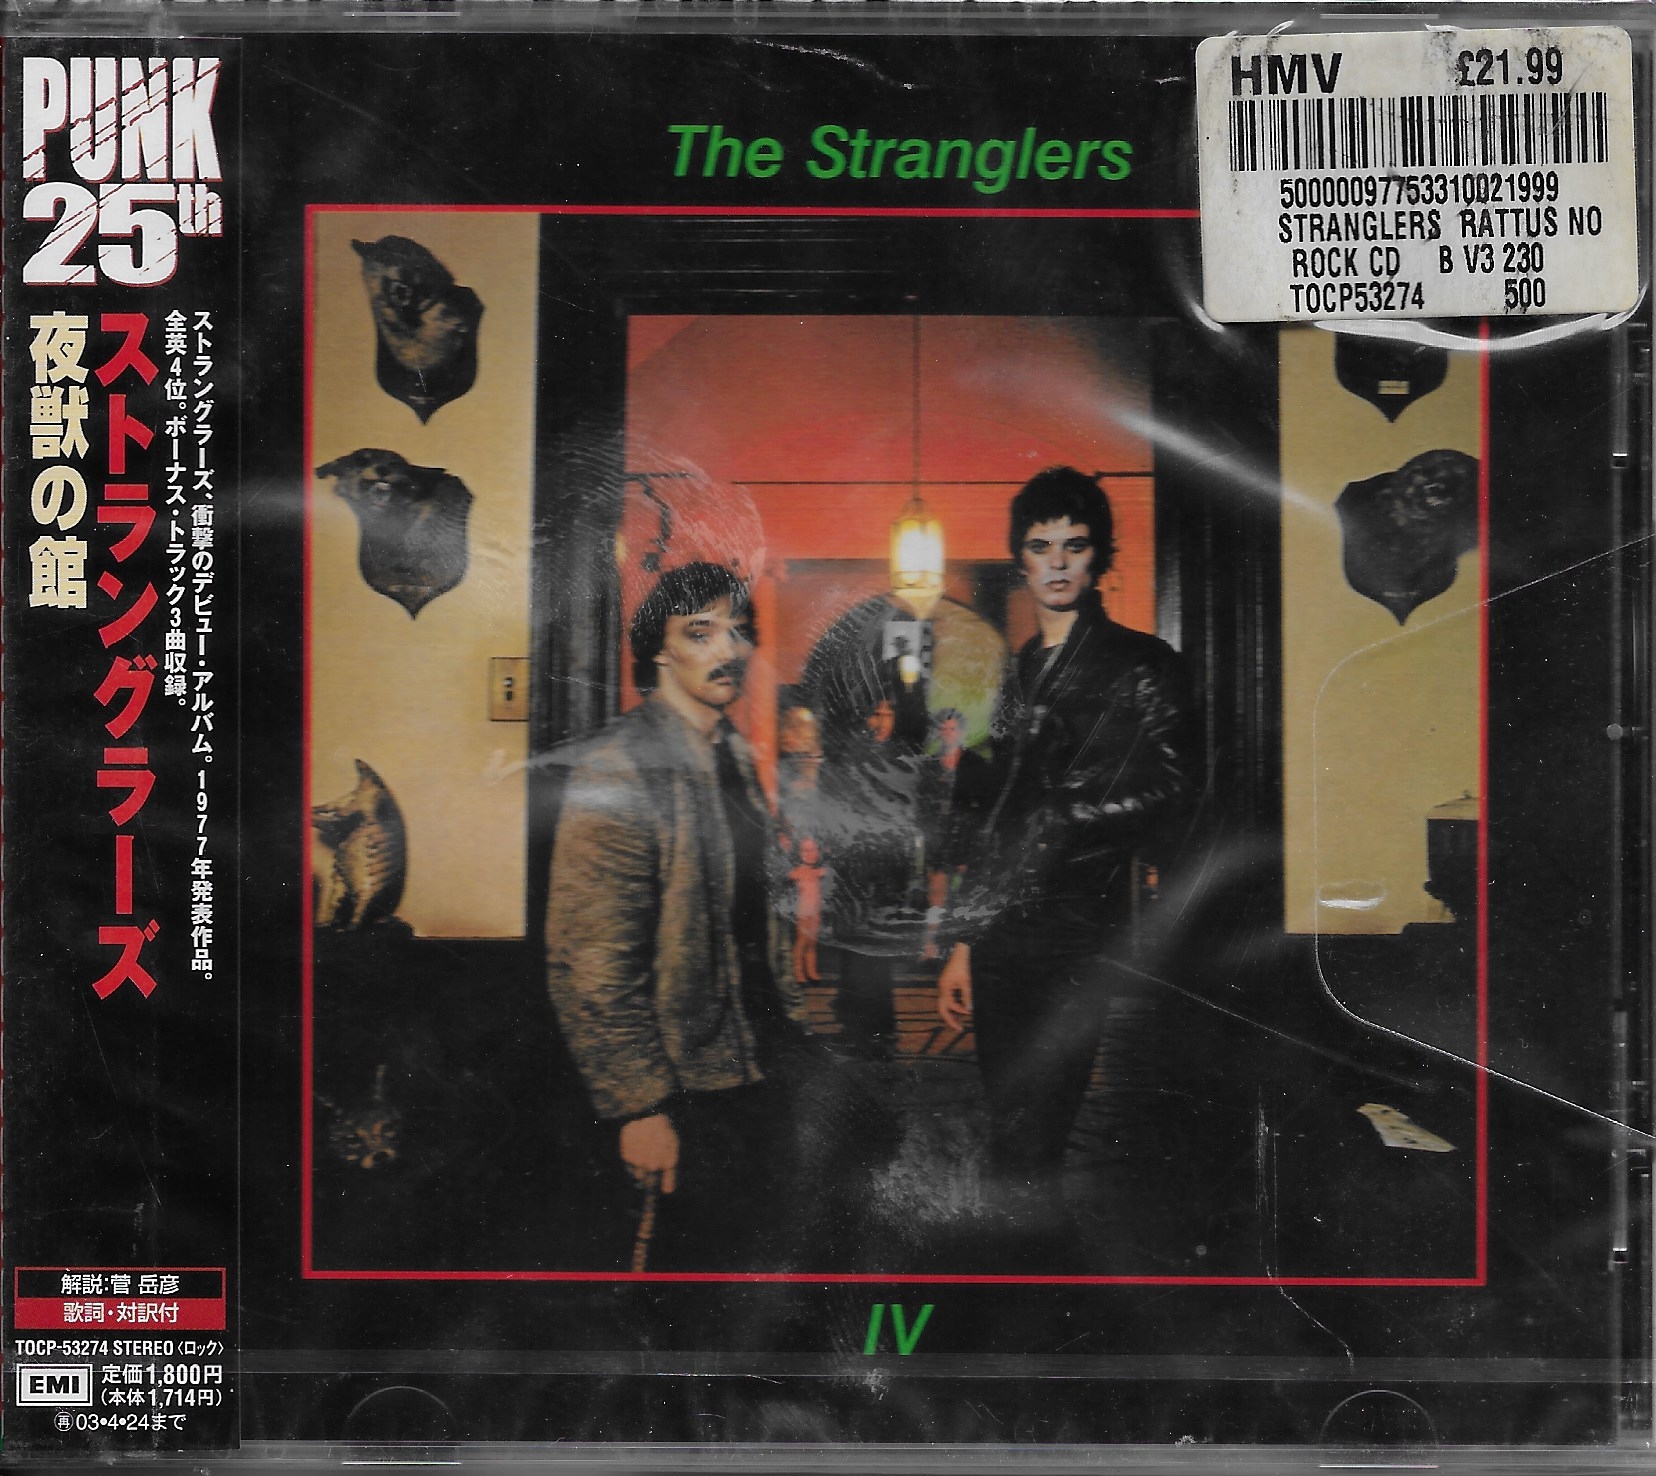 Picture of TOCP 53274 Rattus norvegicus - Japanese CD import (Different tracks) by artist The Stranglers from The Stranglers cds